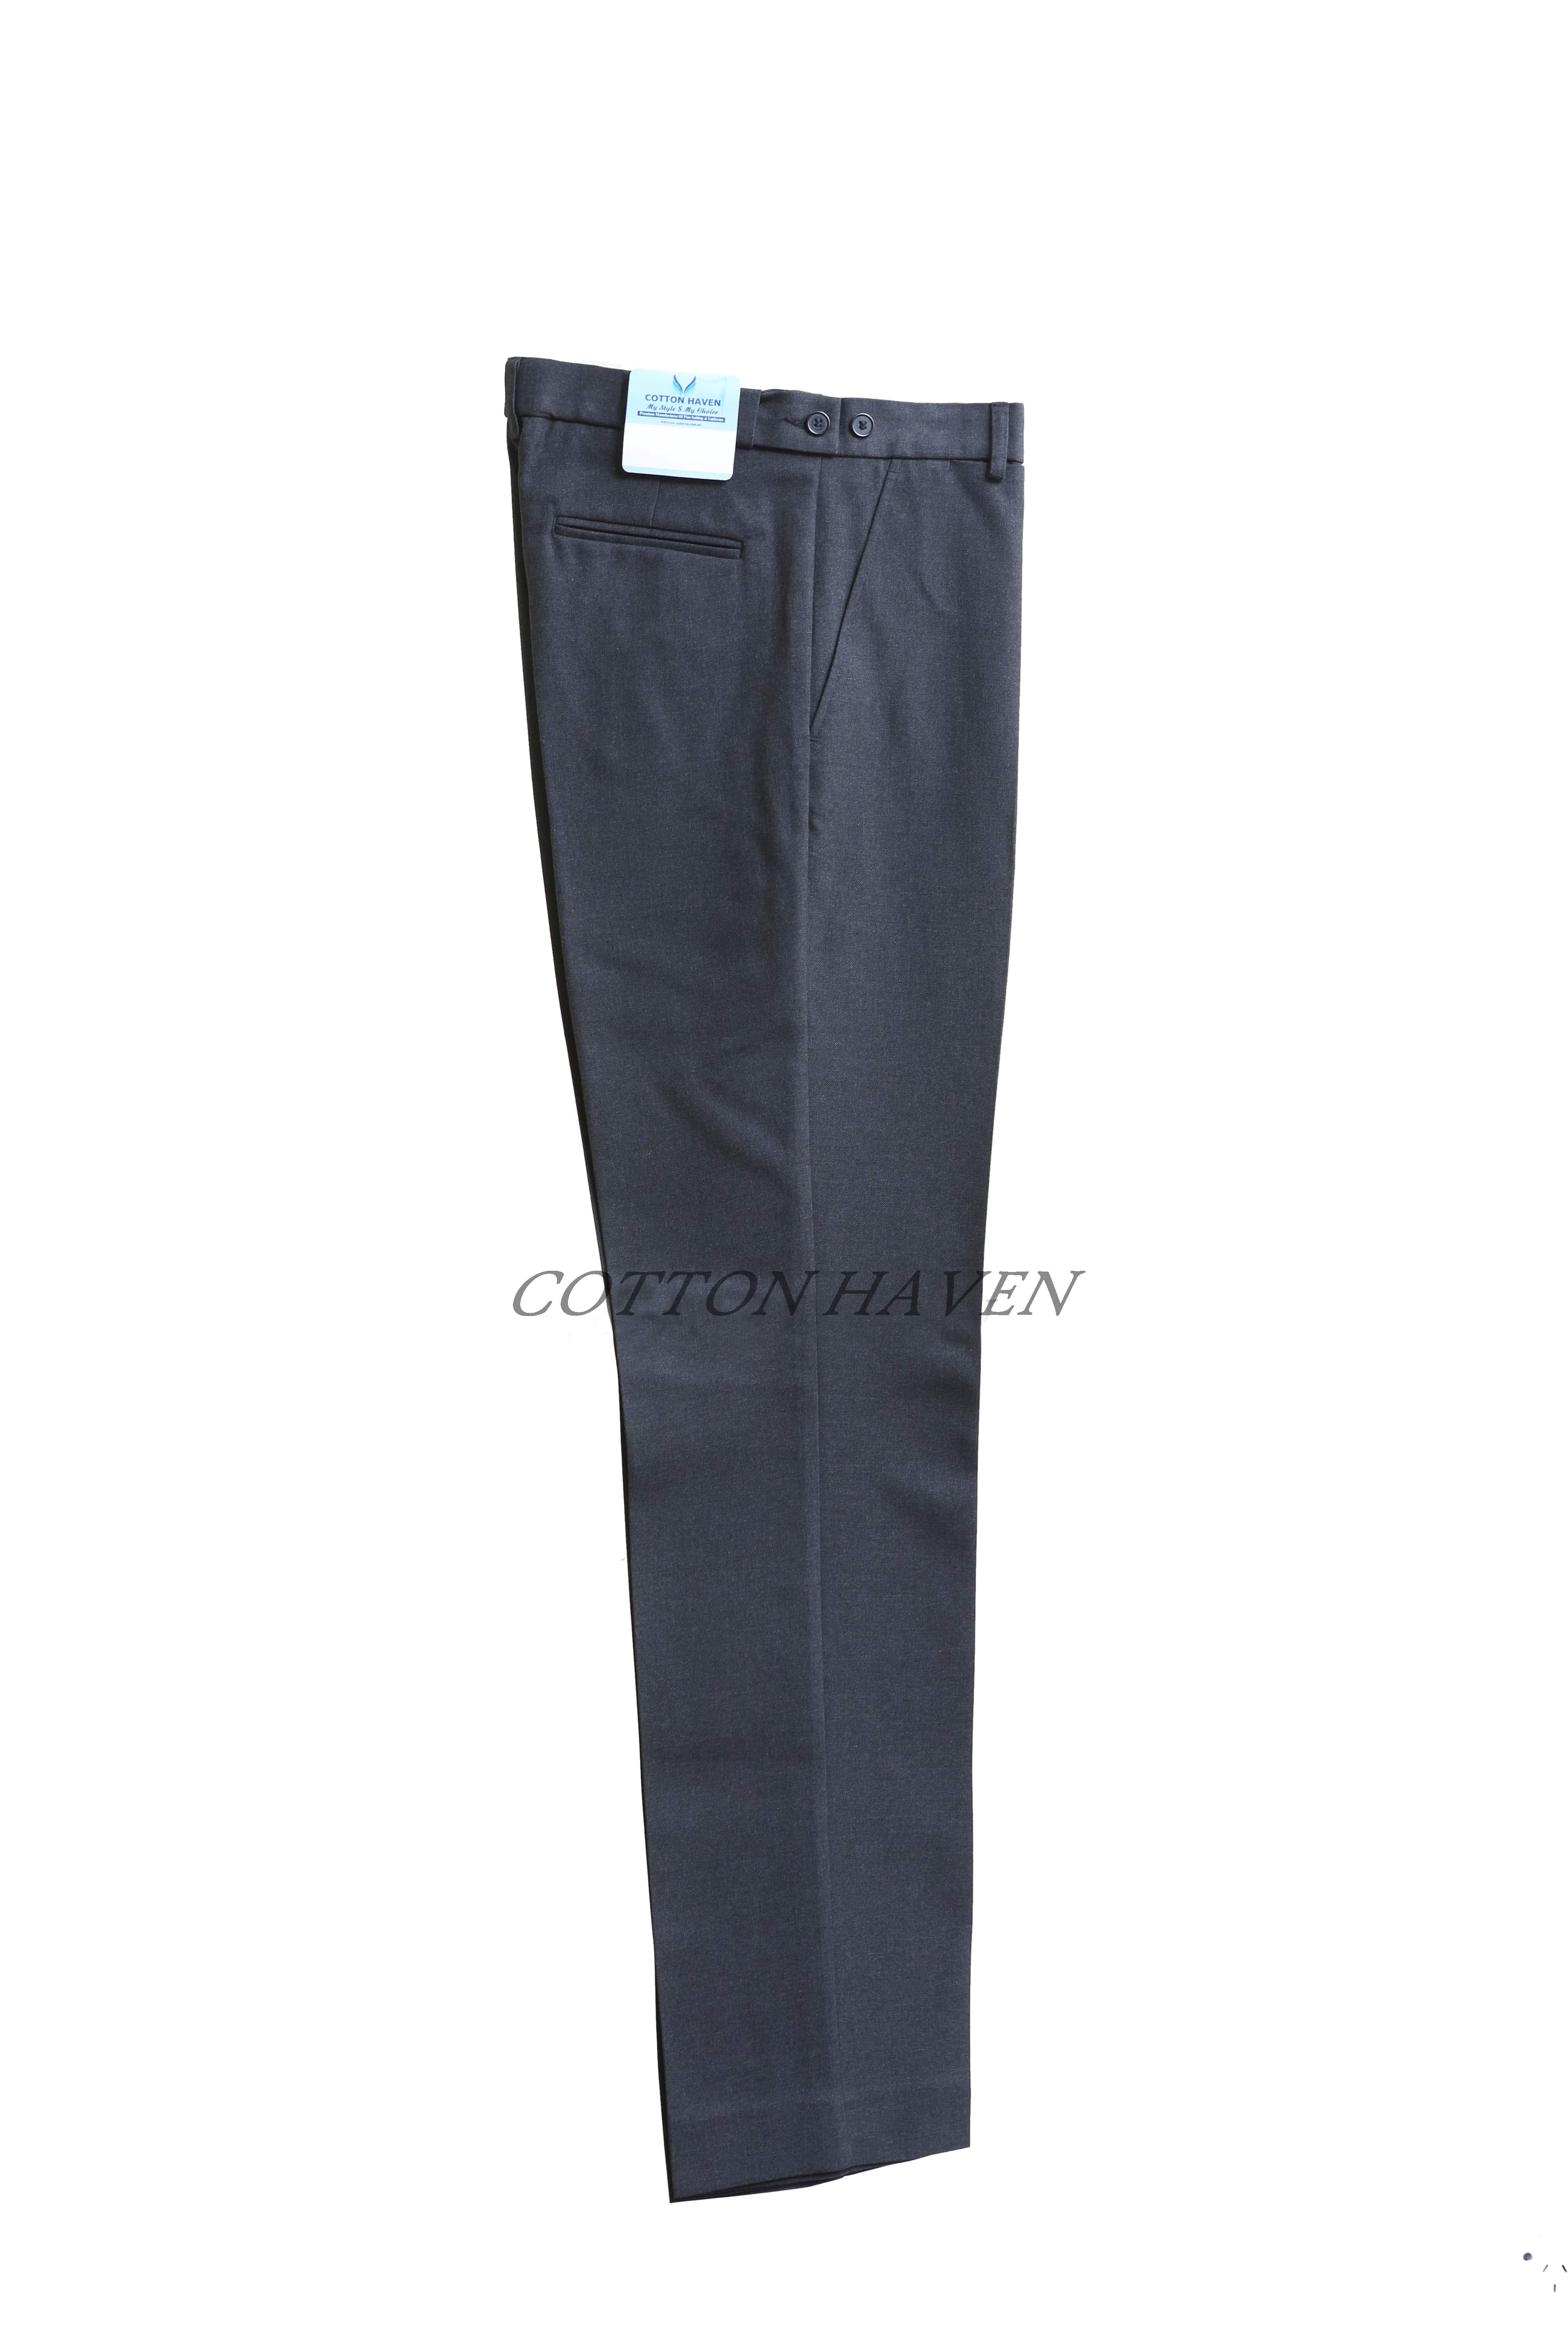 Women's hiking pants, stretchy, extended BETTE for only 59.9 € | NORTHFINDER